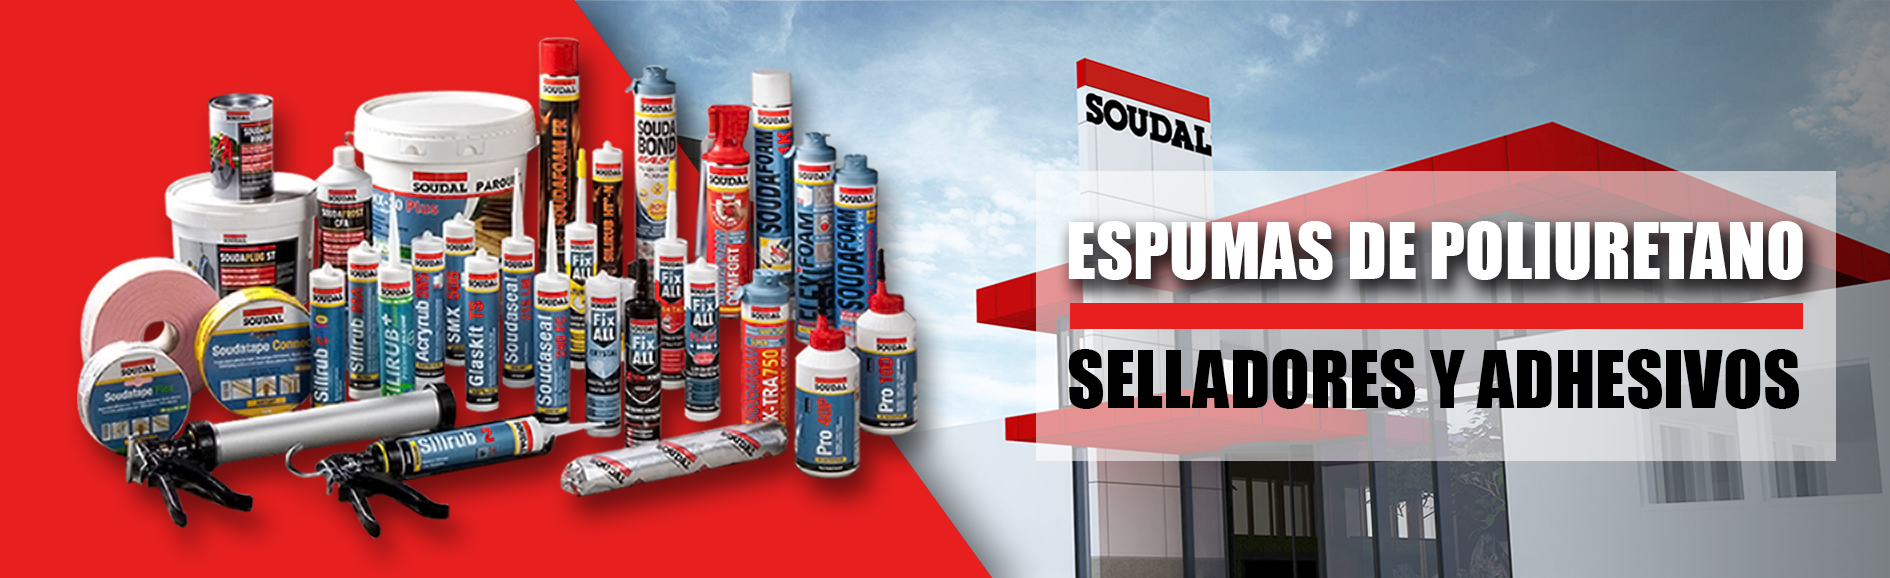 BANNER SOUDAL PRODUCTOS II